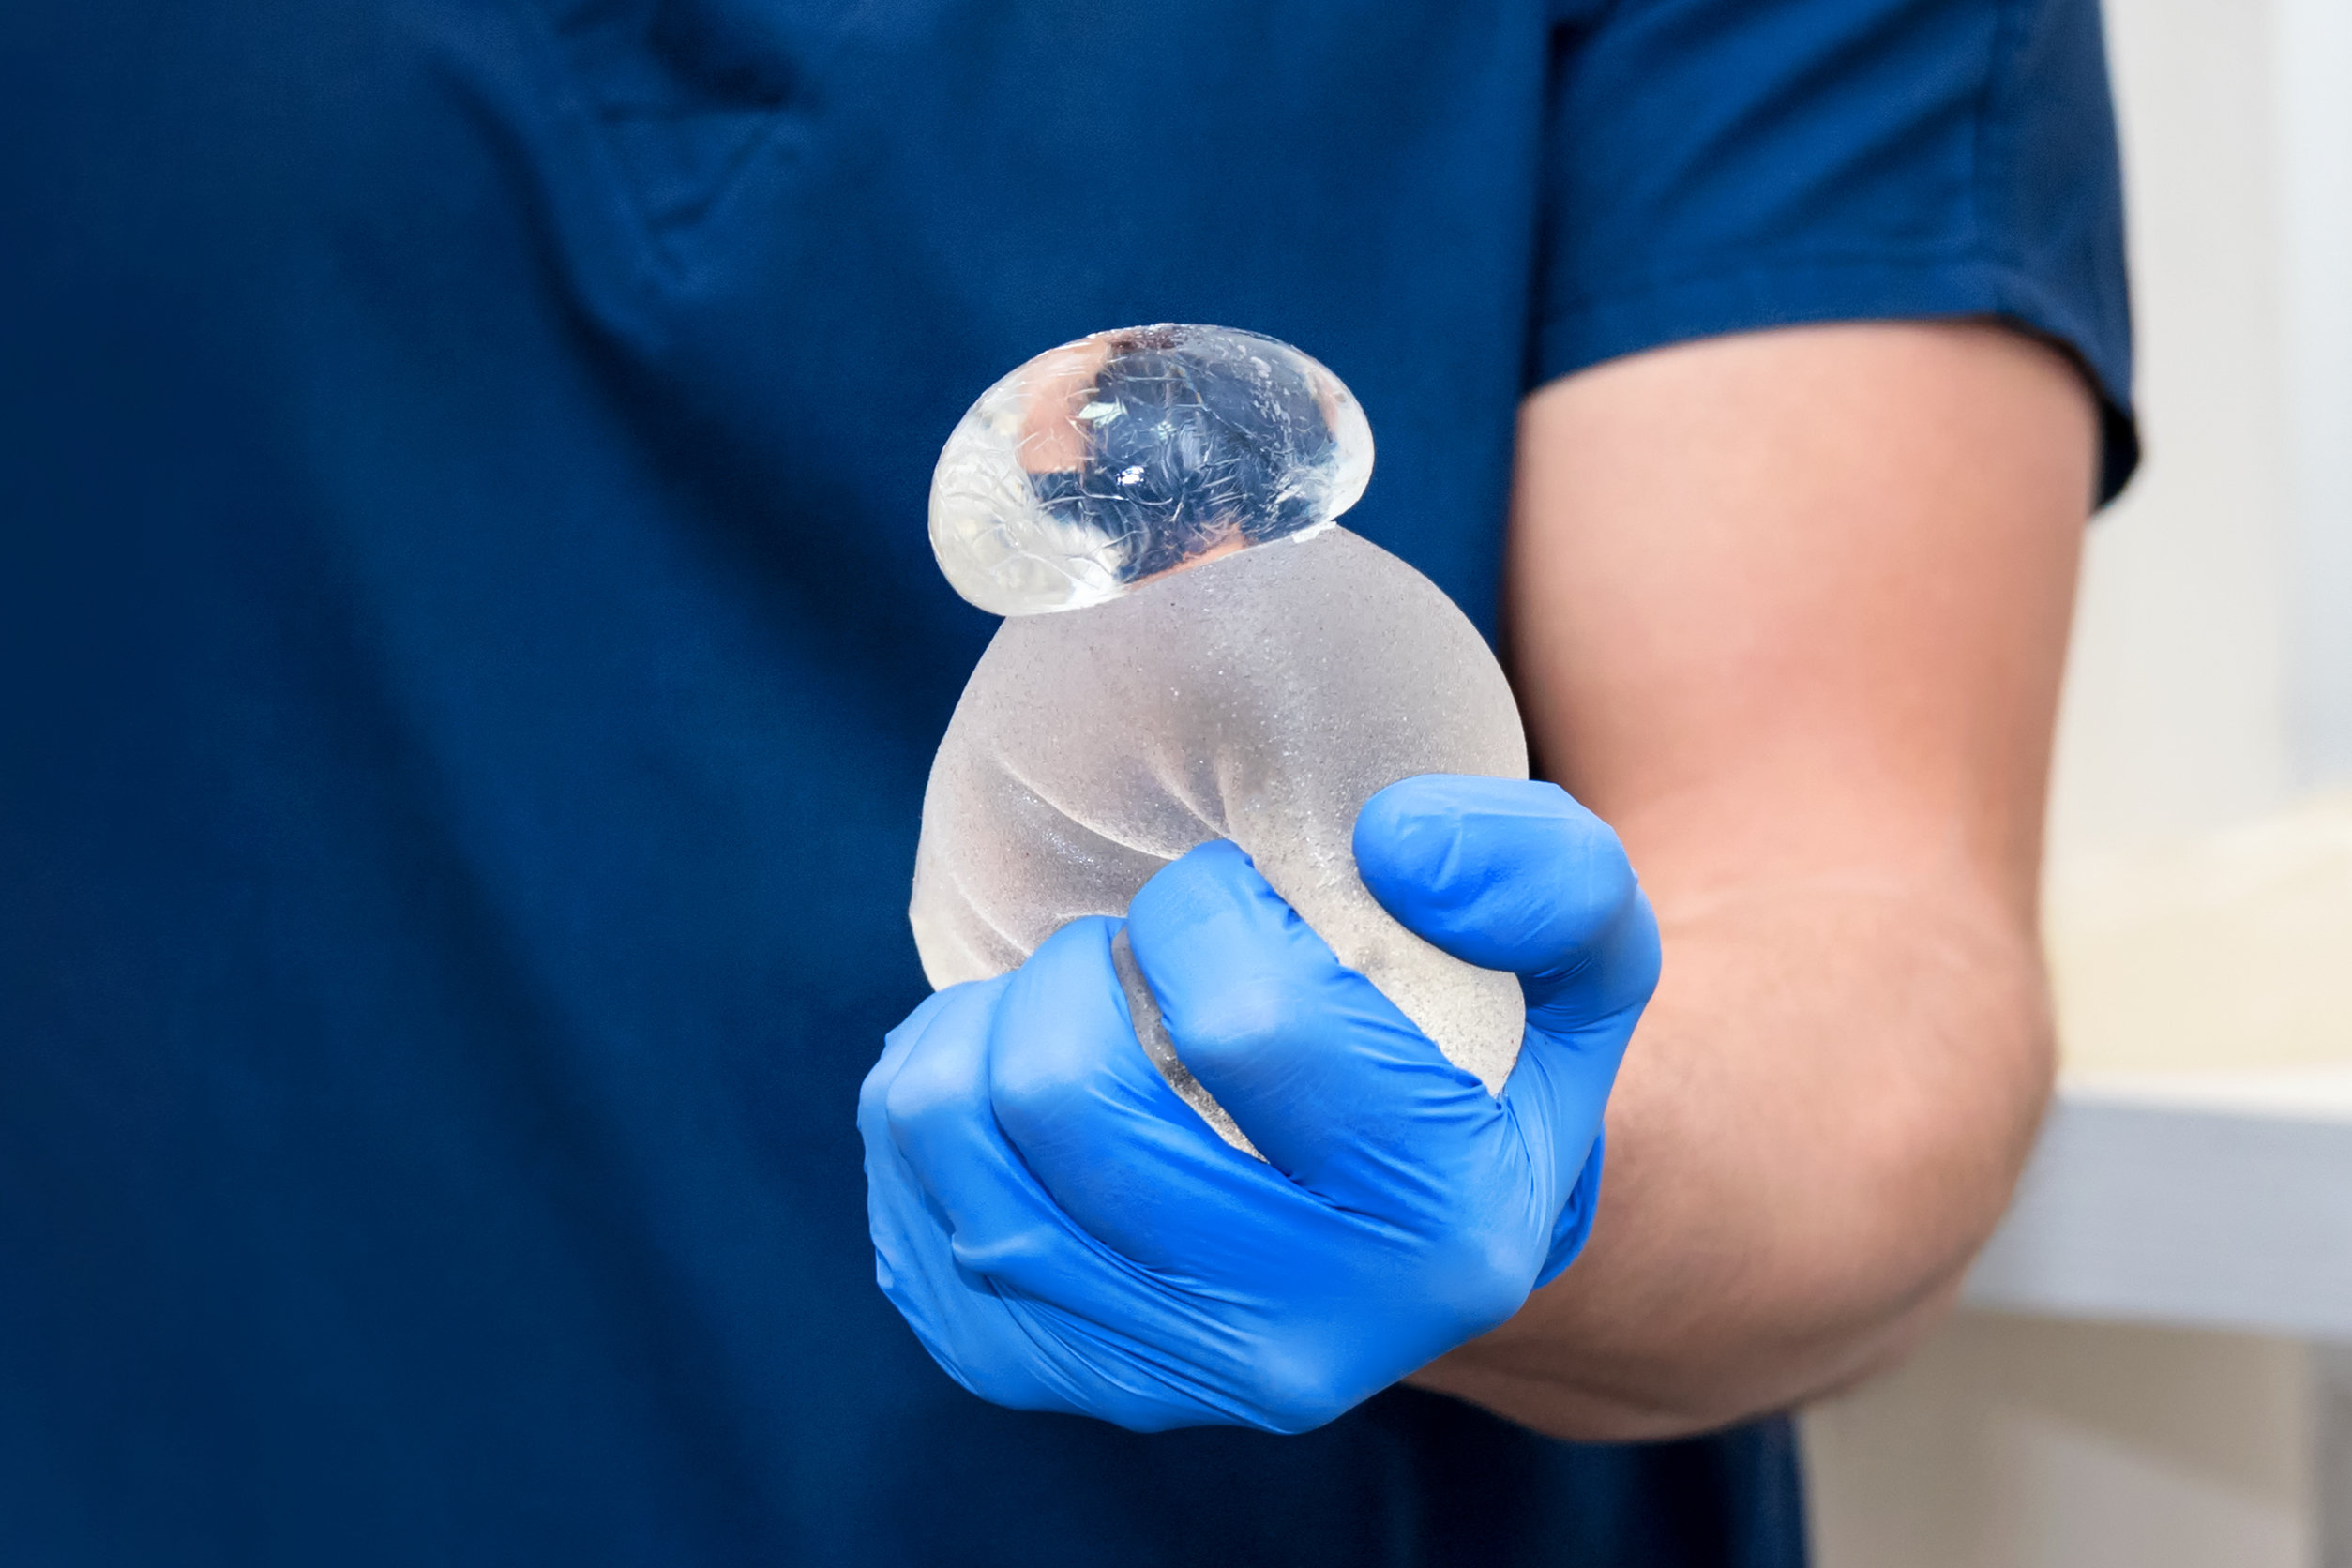 What are gummy bear breast implants?